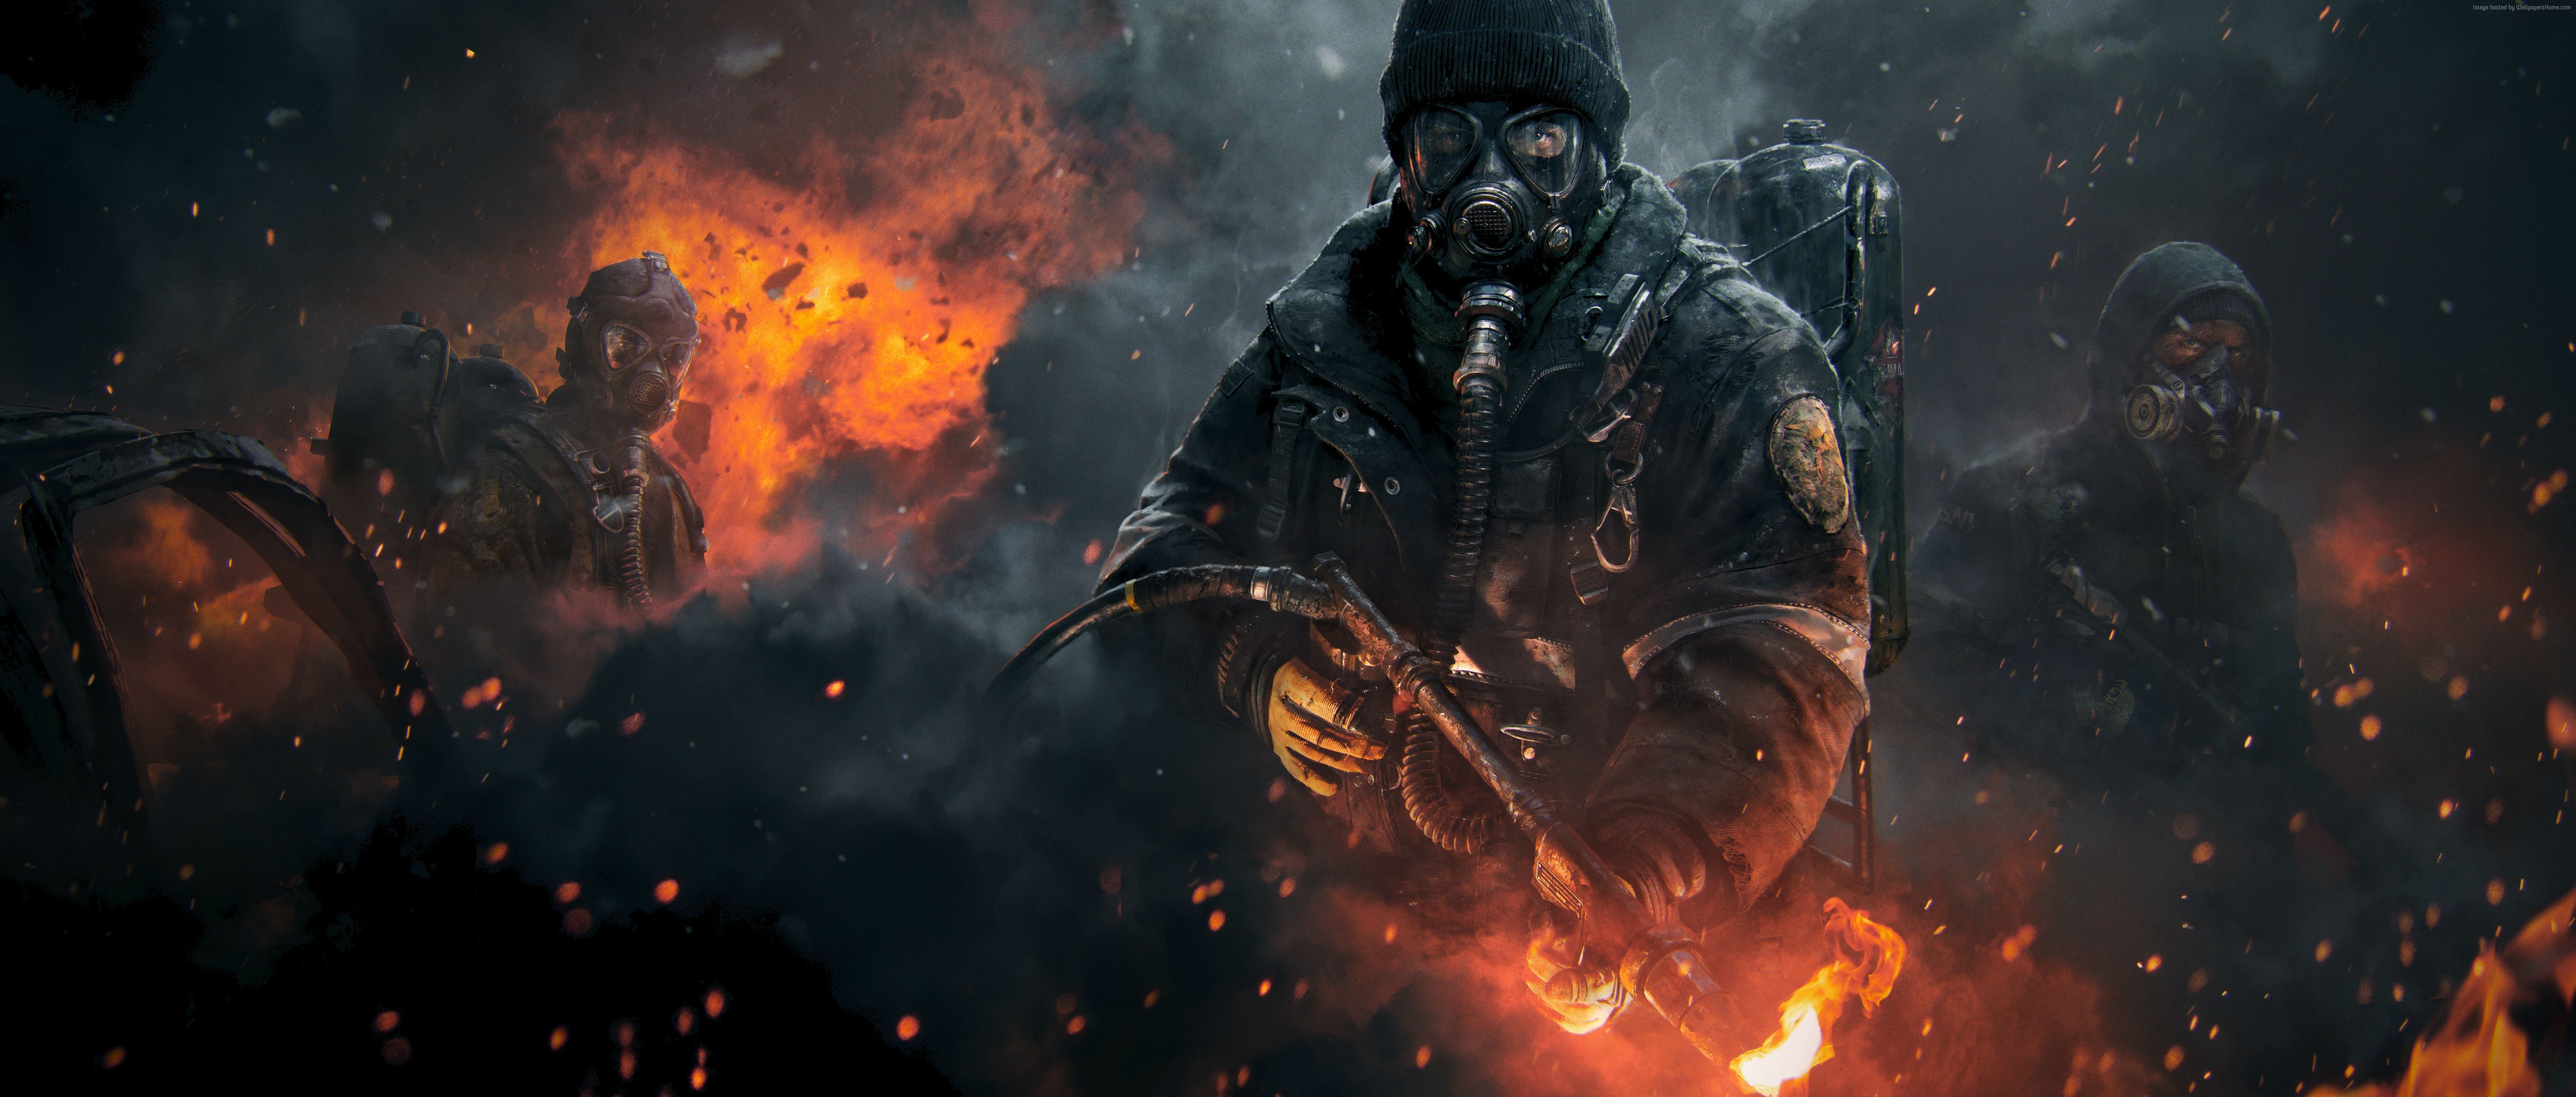 Wallpapers The Division, Tom Clancy's, flamethrower, apocalypse, PS4